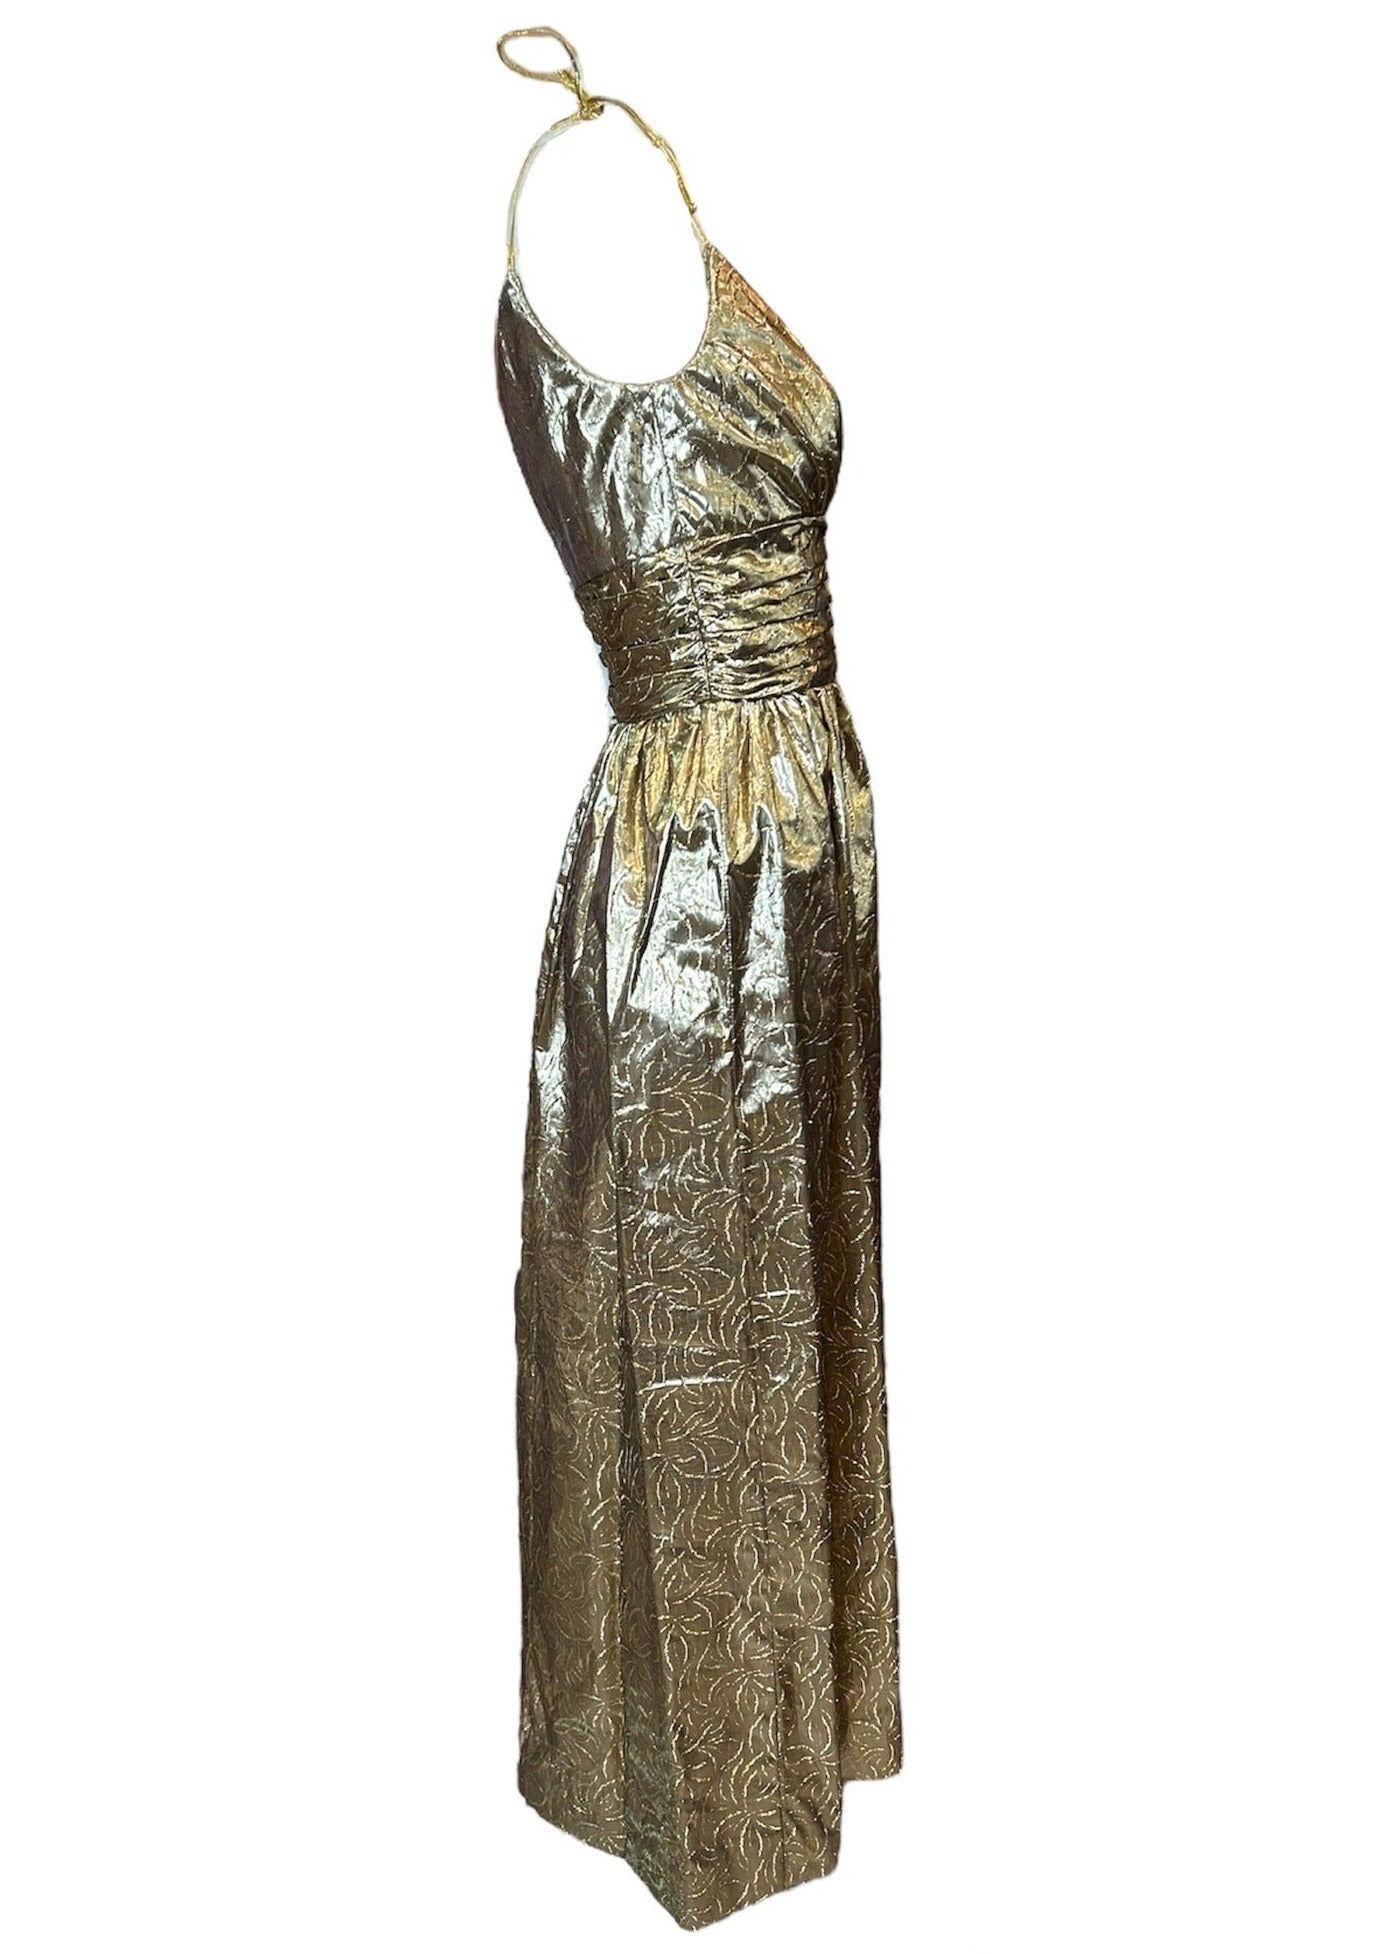 1960s Golden Bond Girl Lame Gown SIDE PHOTO 4 OF 5